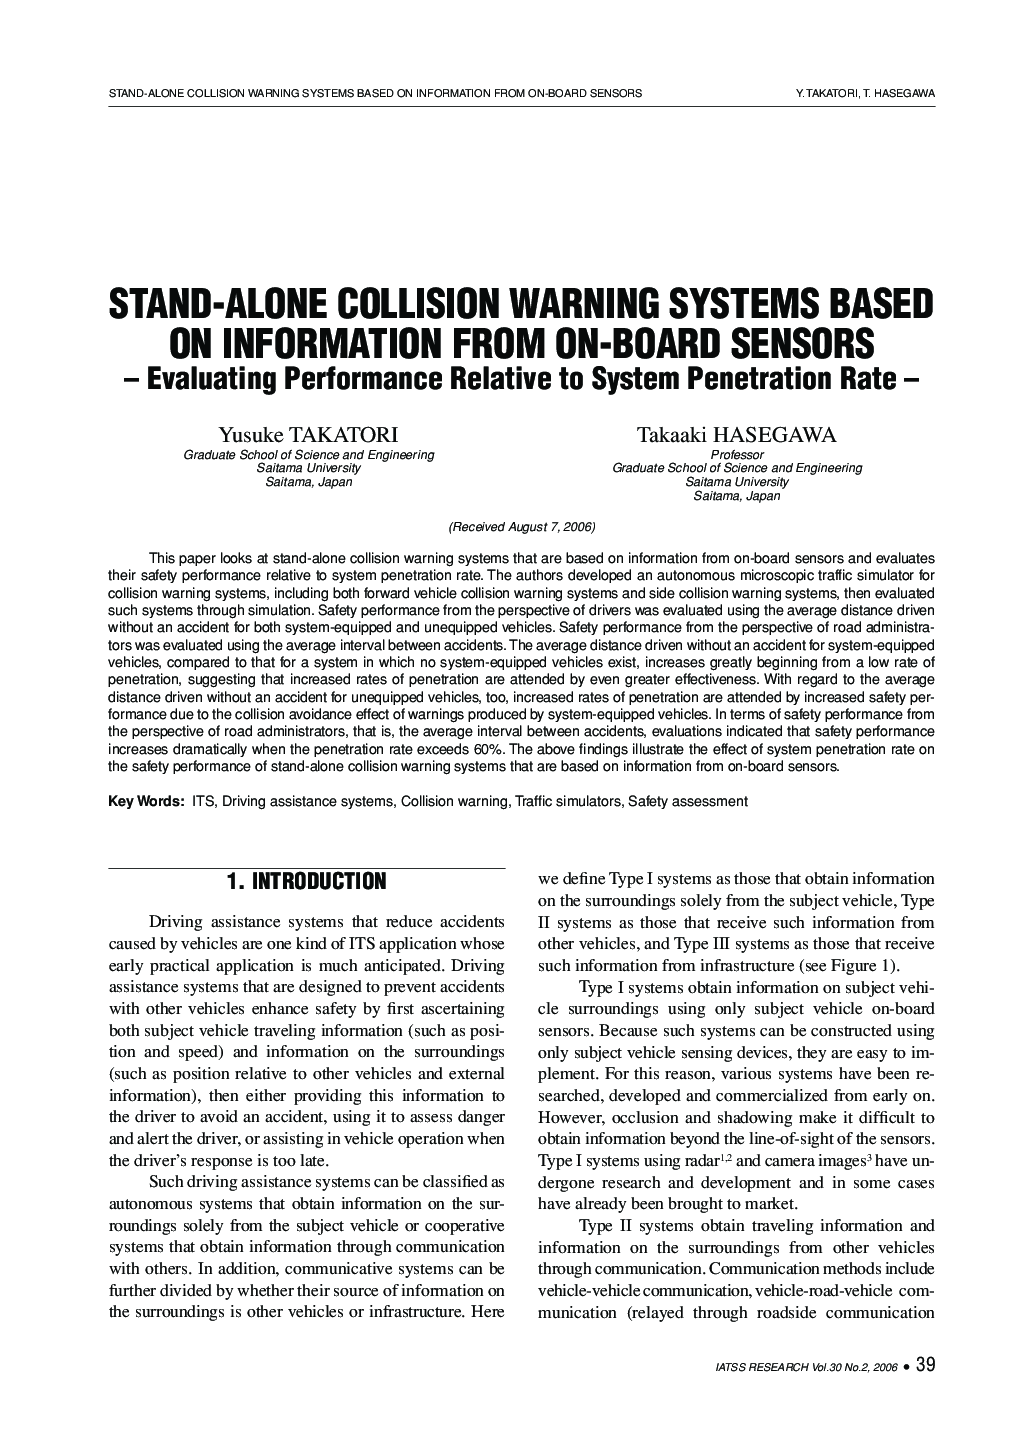 STAND-ALONE COLLISION WARNING SYSTEMS BASED ON INFORMATION FROM ON-BOARD SENSORS: Evaluating Performance Relative to System Penetration Rate